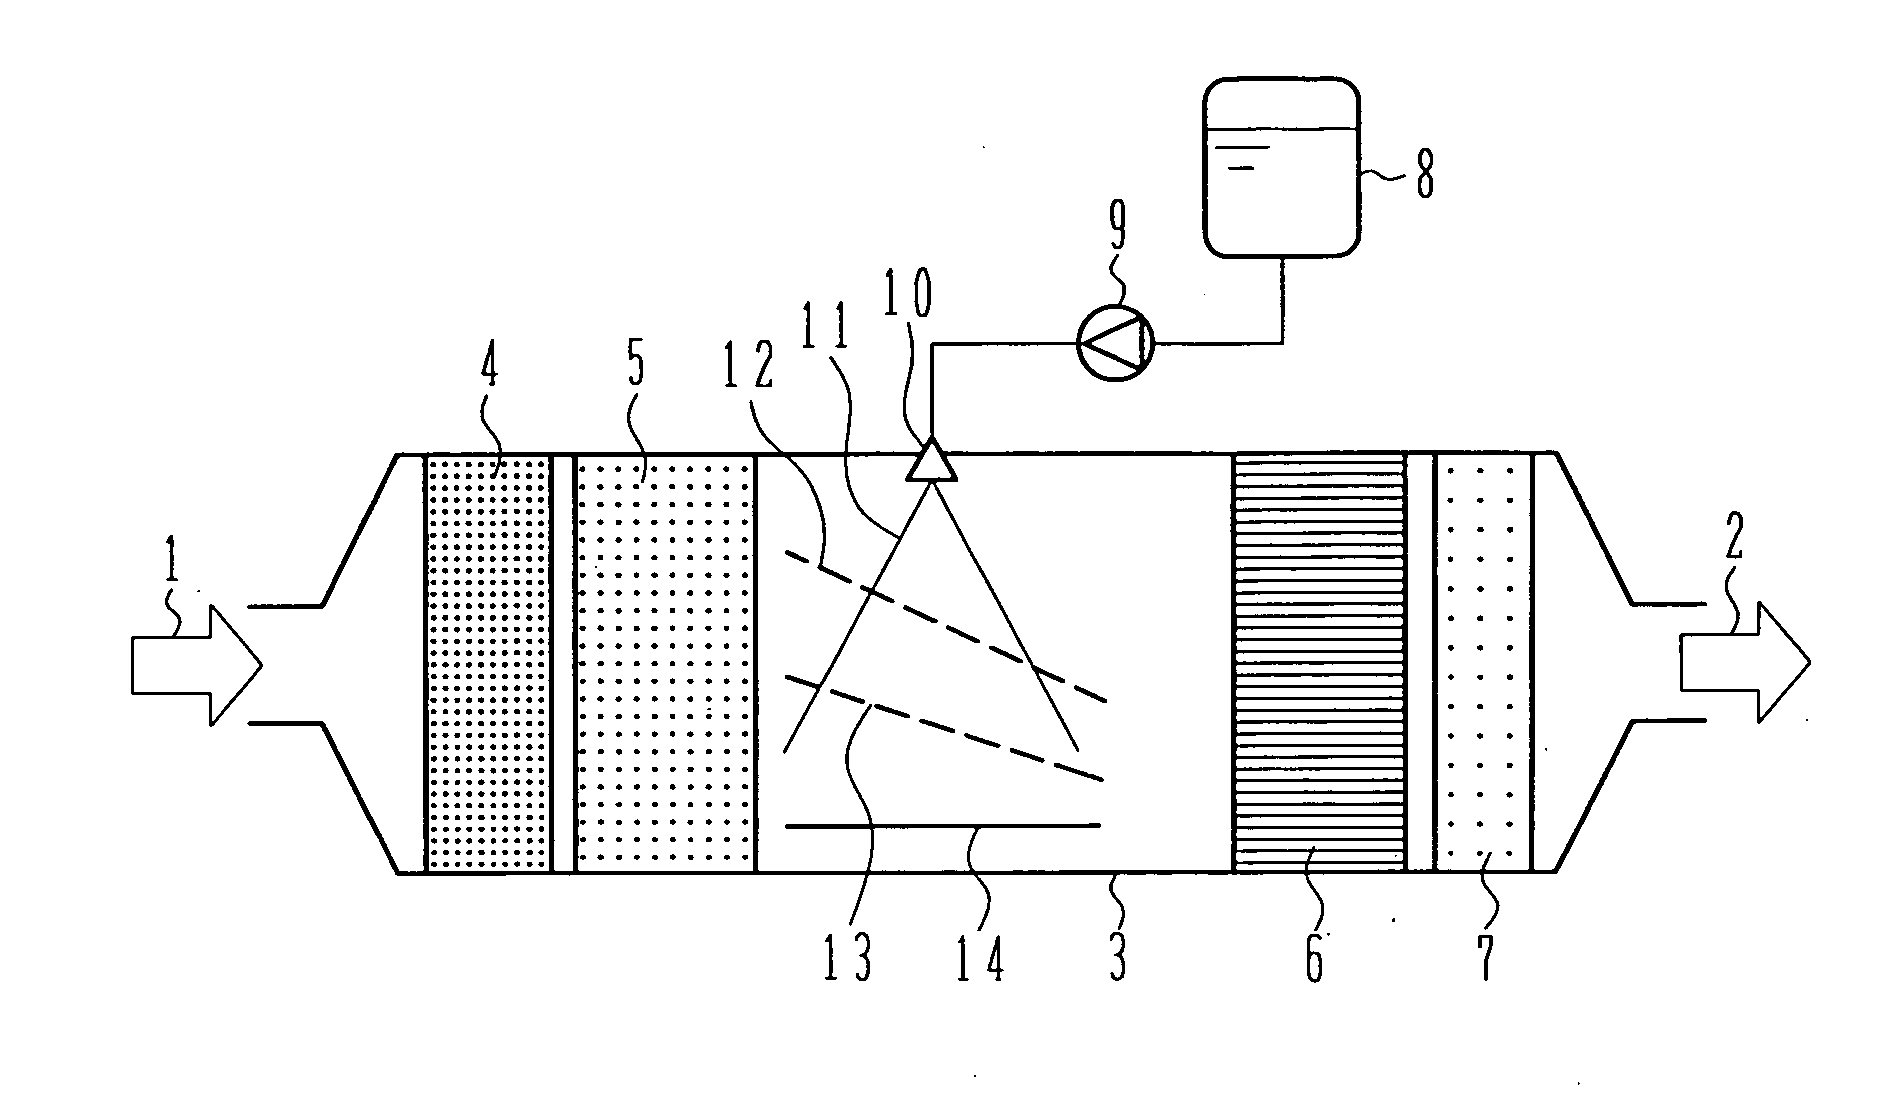 Exhaust aftertreatment system using urea water